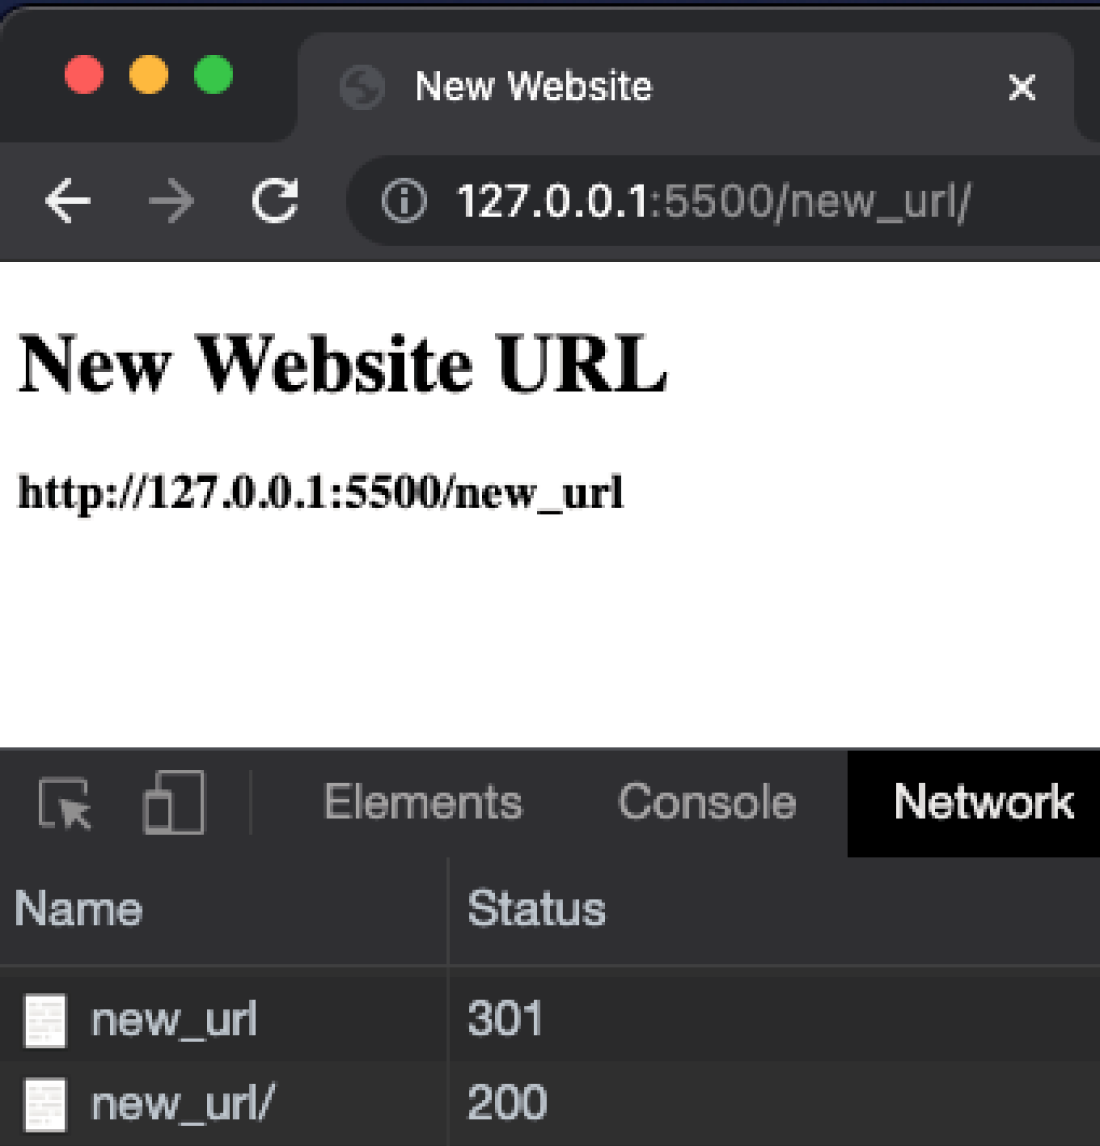 Screenshot of a website showing the new website URL and Status Codes